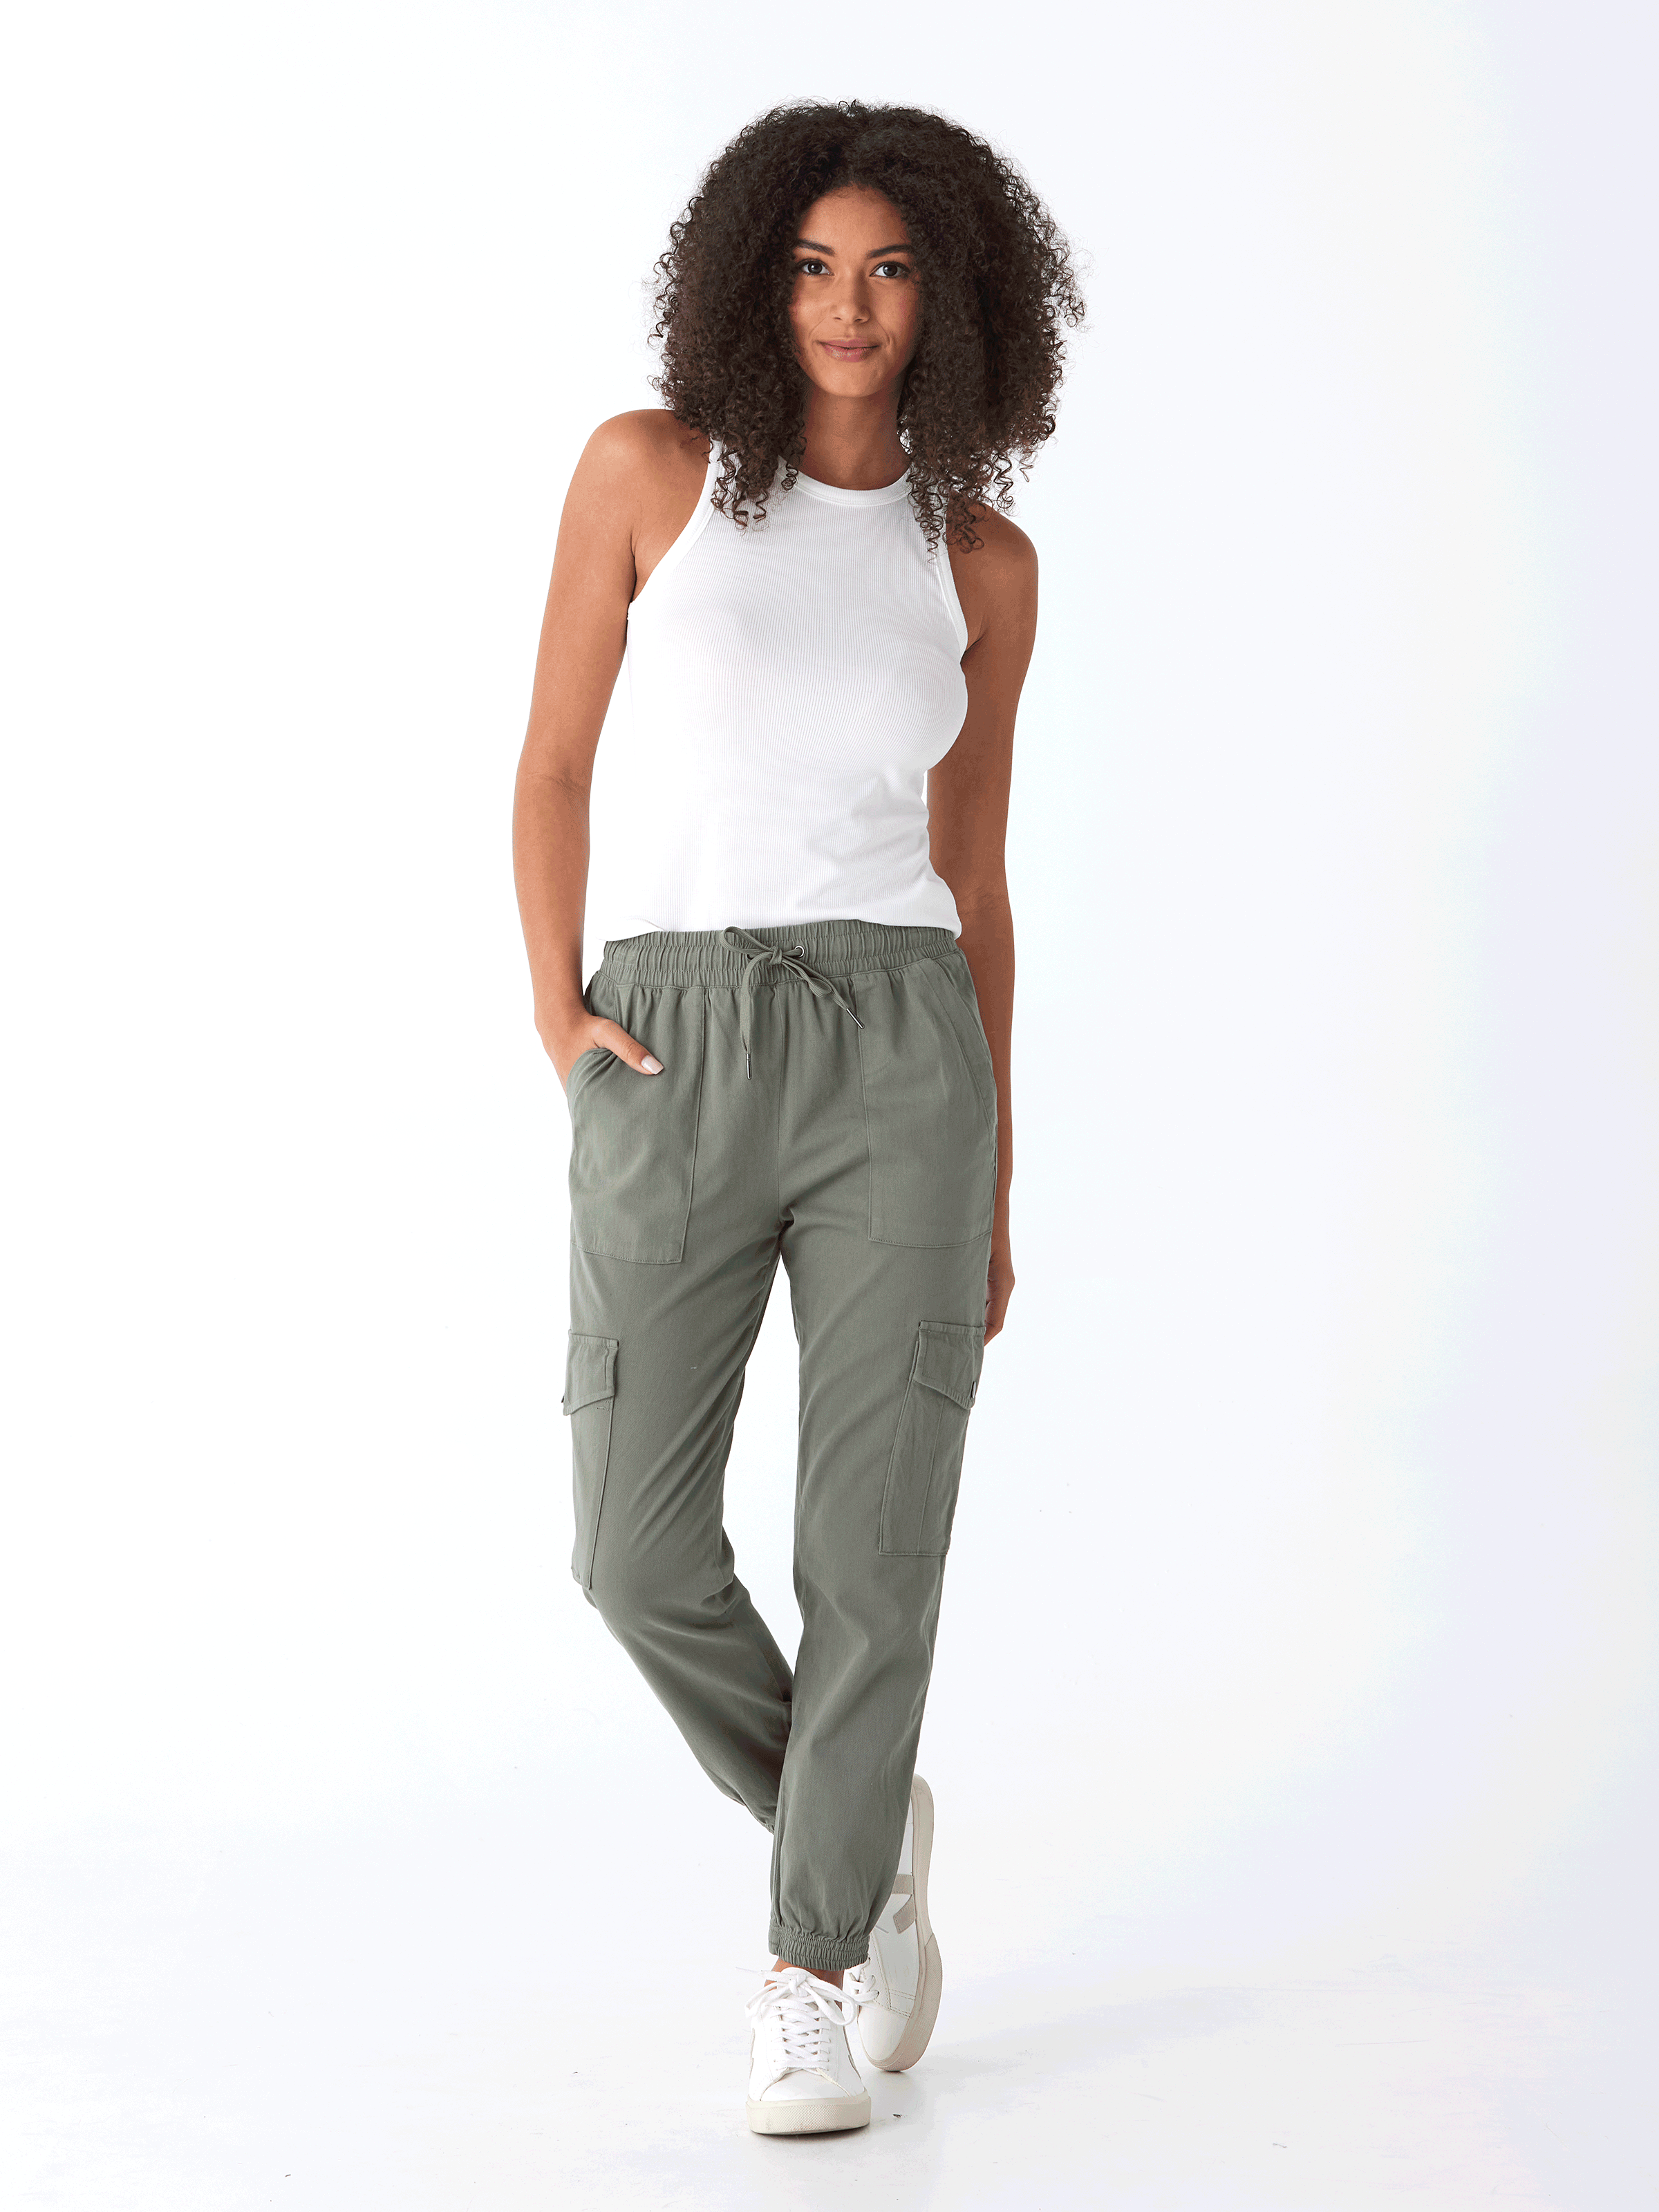 Delilah Stretch Twill Cargo Jogger 27"